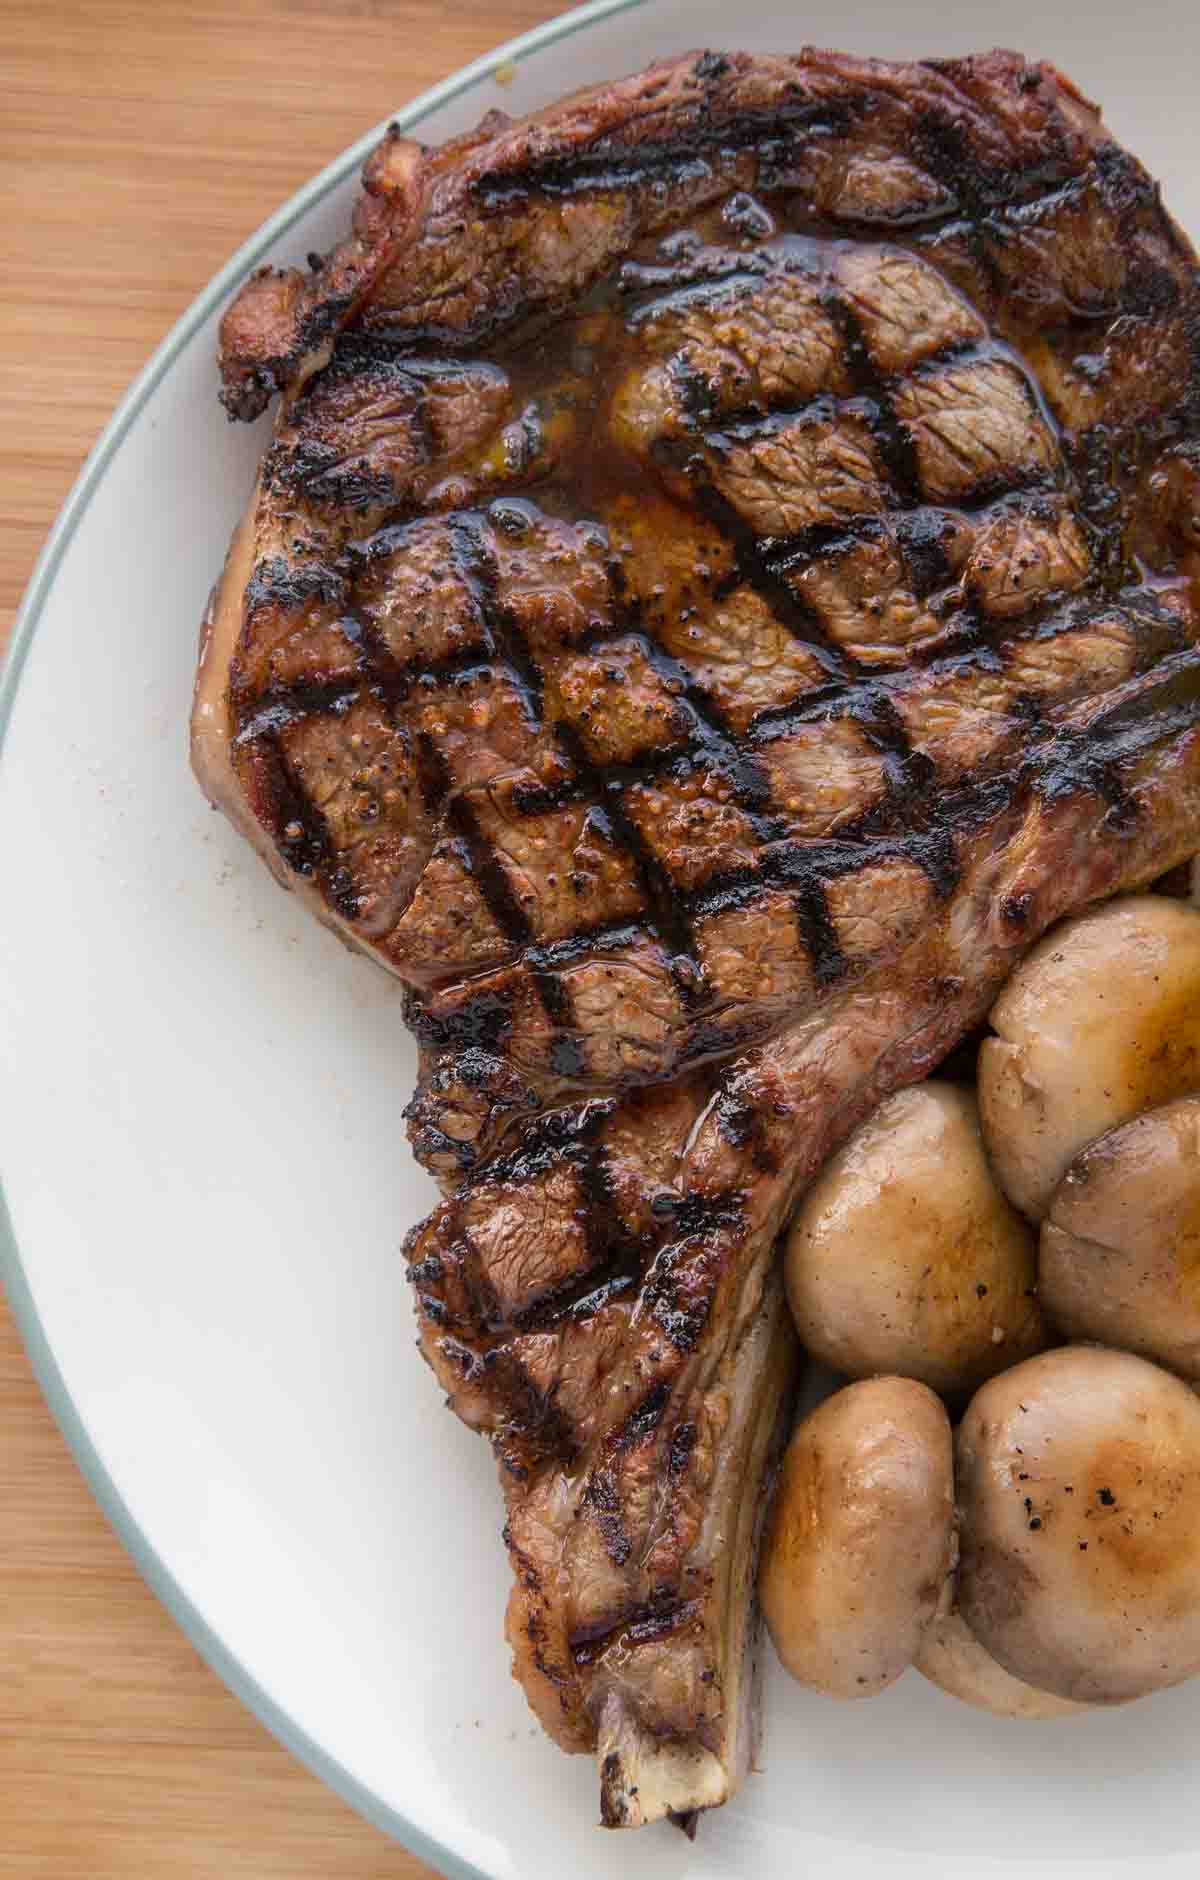 crosshatch marked ribeye steak on white plate with grilled mushrooms